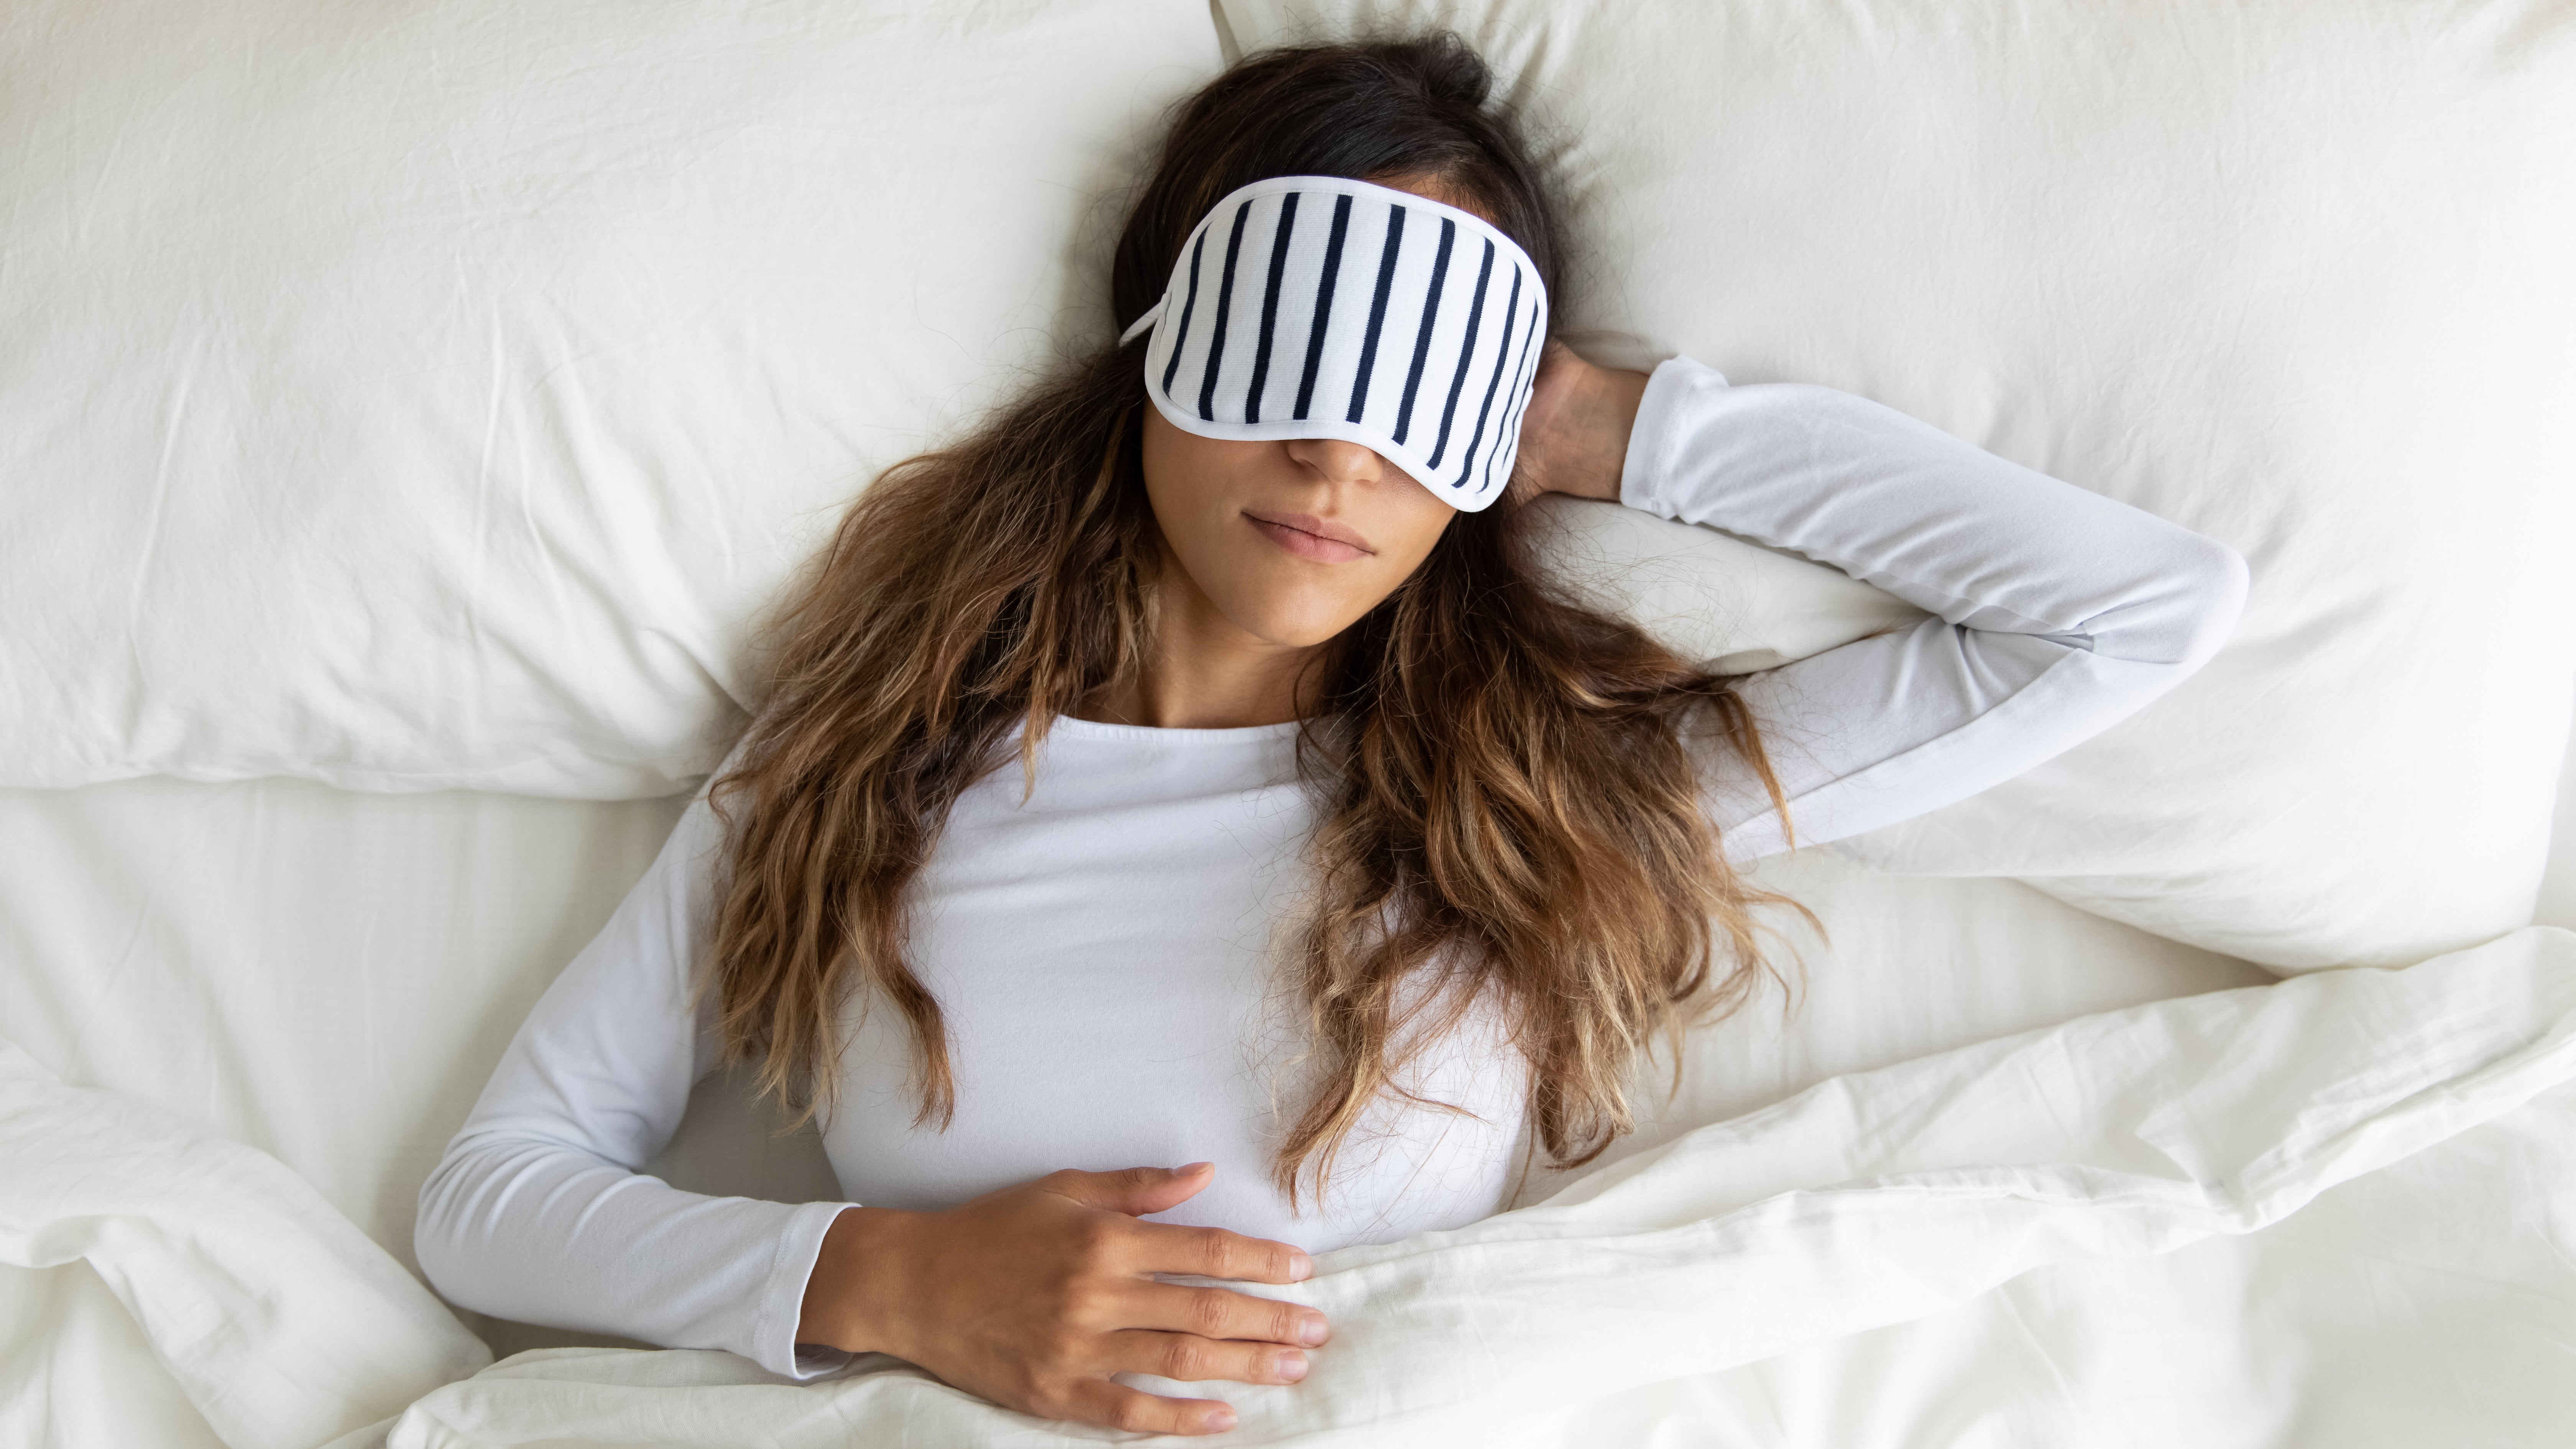 Why experts don’t recommend taking melatonin to sleep